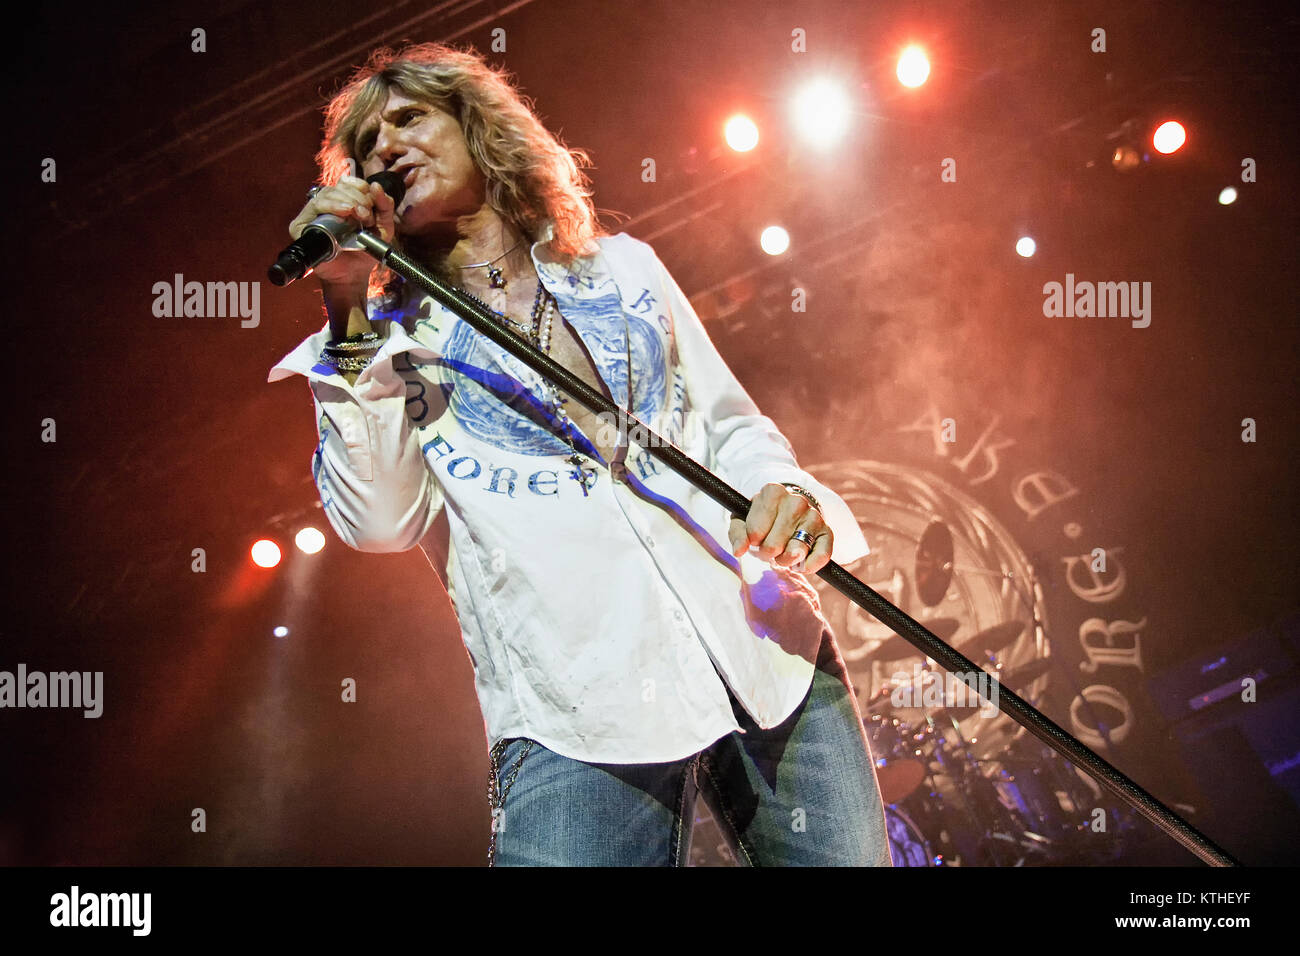 The British hard rock band Whitesnake performs a live concert at Sentrum Scene in Oslo. Here singer, songwriter and musician David Coverdale is seen live on stage. Norway, 20/11 2011. Stock Photo